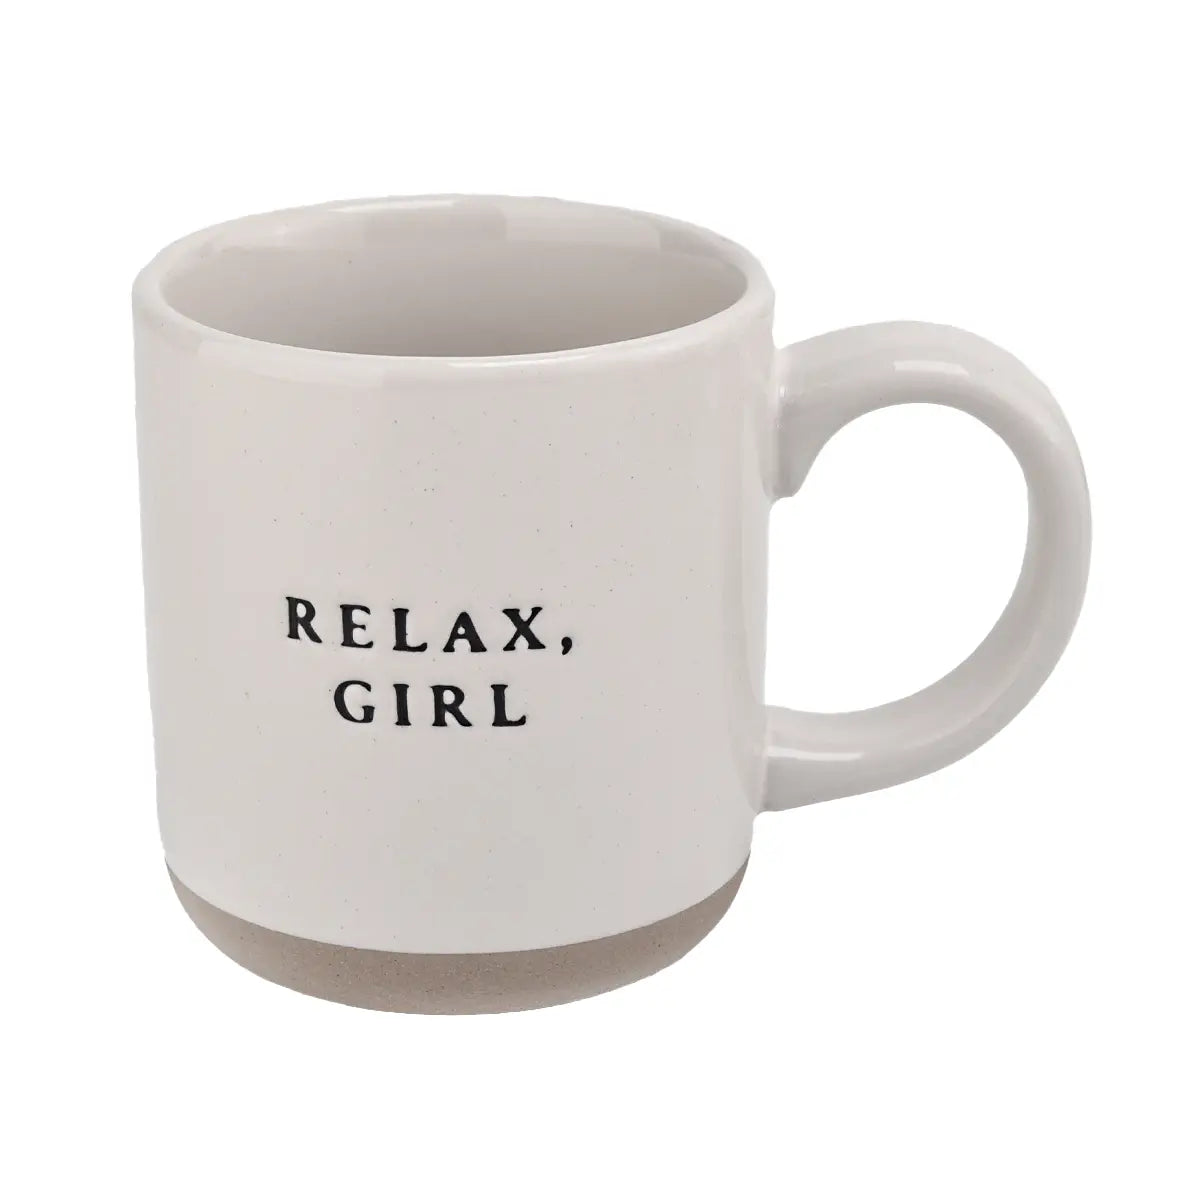 Relax girl mug neutral natural stoneware coffee mug galentines  valentines day gift for her self care girlfriend gal pal Modern smart causal female chic effortless outfit womens ladies gift elegant effortless clothing clothes apparel outfits chic winter style women’s boutique trendy teacher office cute outfit boutique clothes fashion work from home lounge athleisure holiday gift for her midsize curvy sizes 